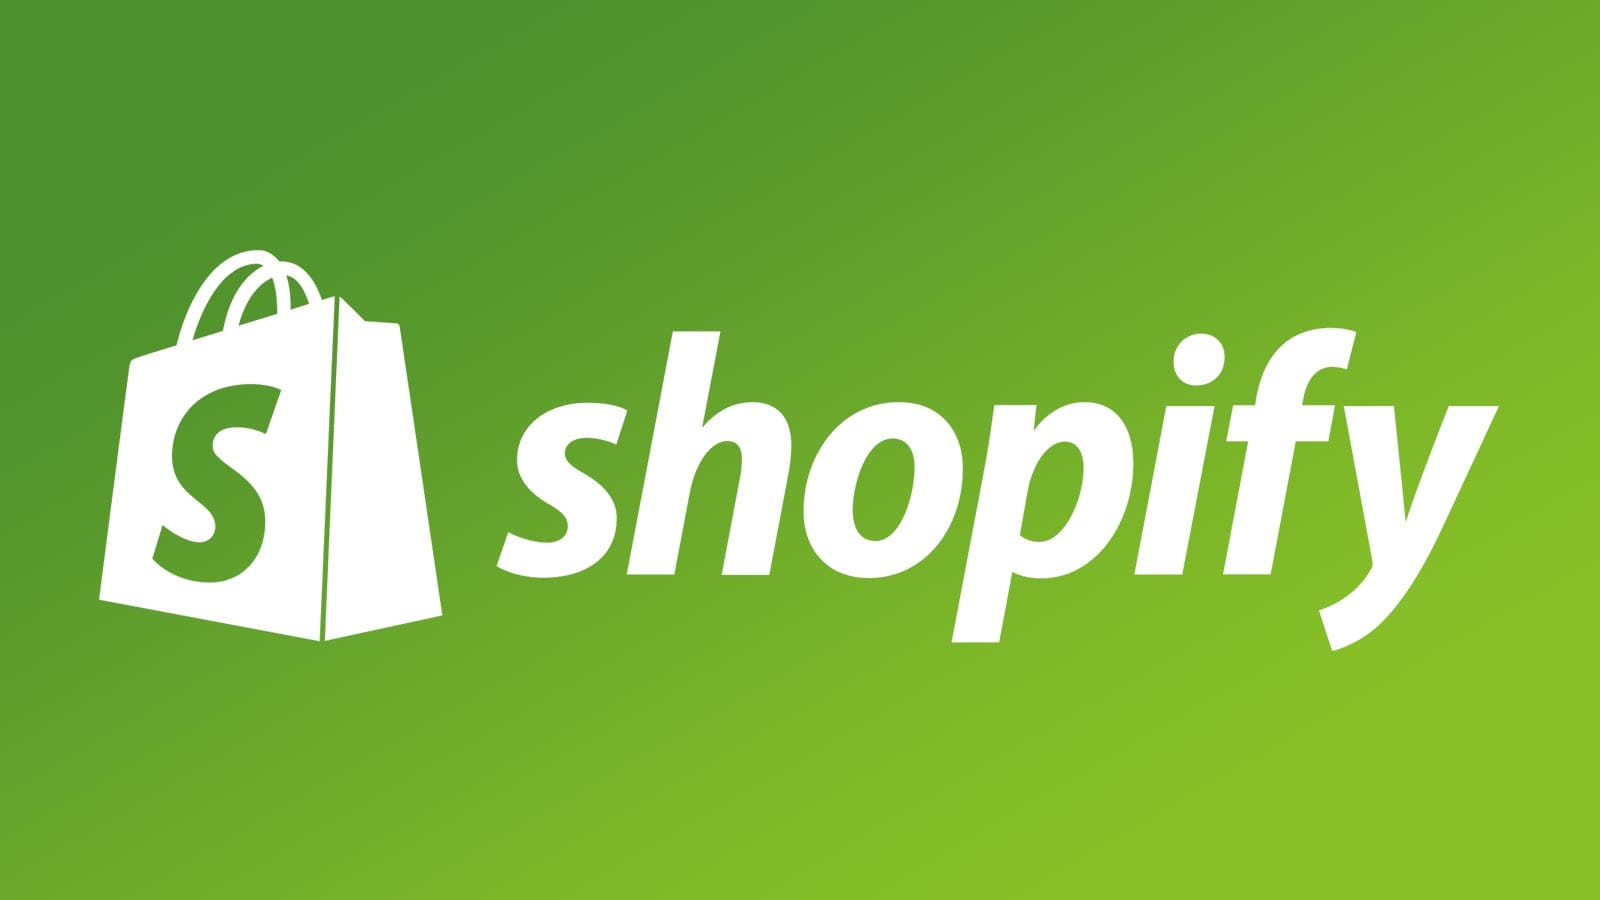 Publishers drag Shopify to court over allegations of selling pirated books